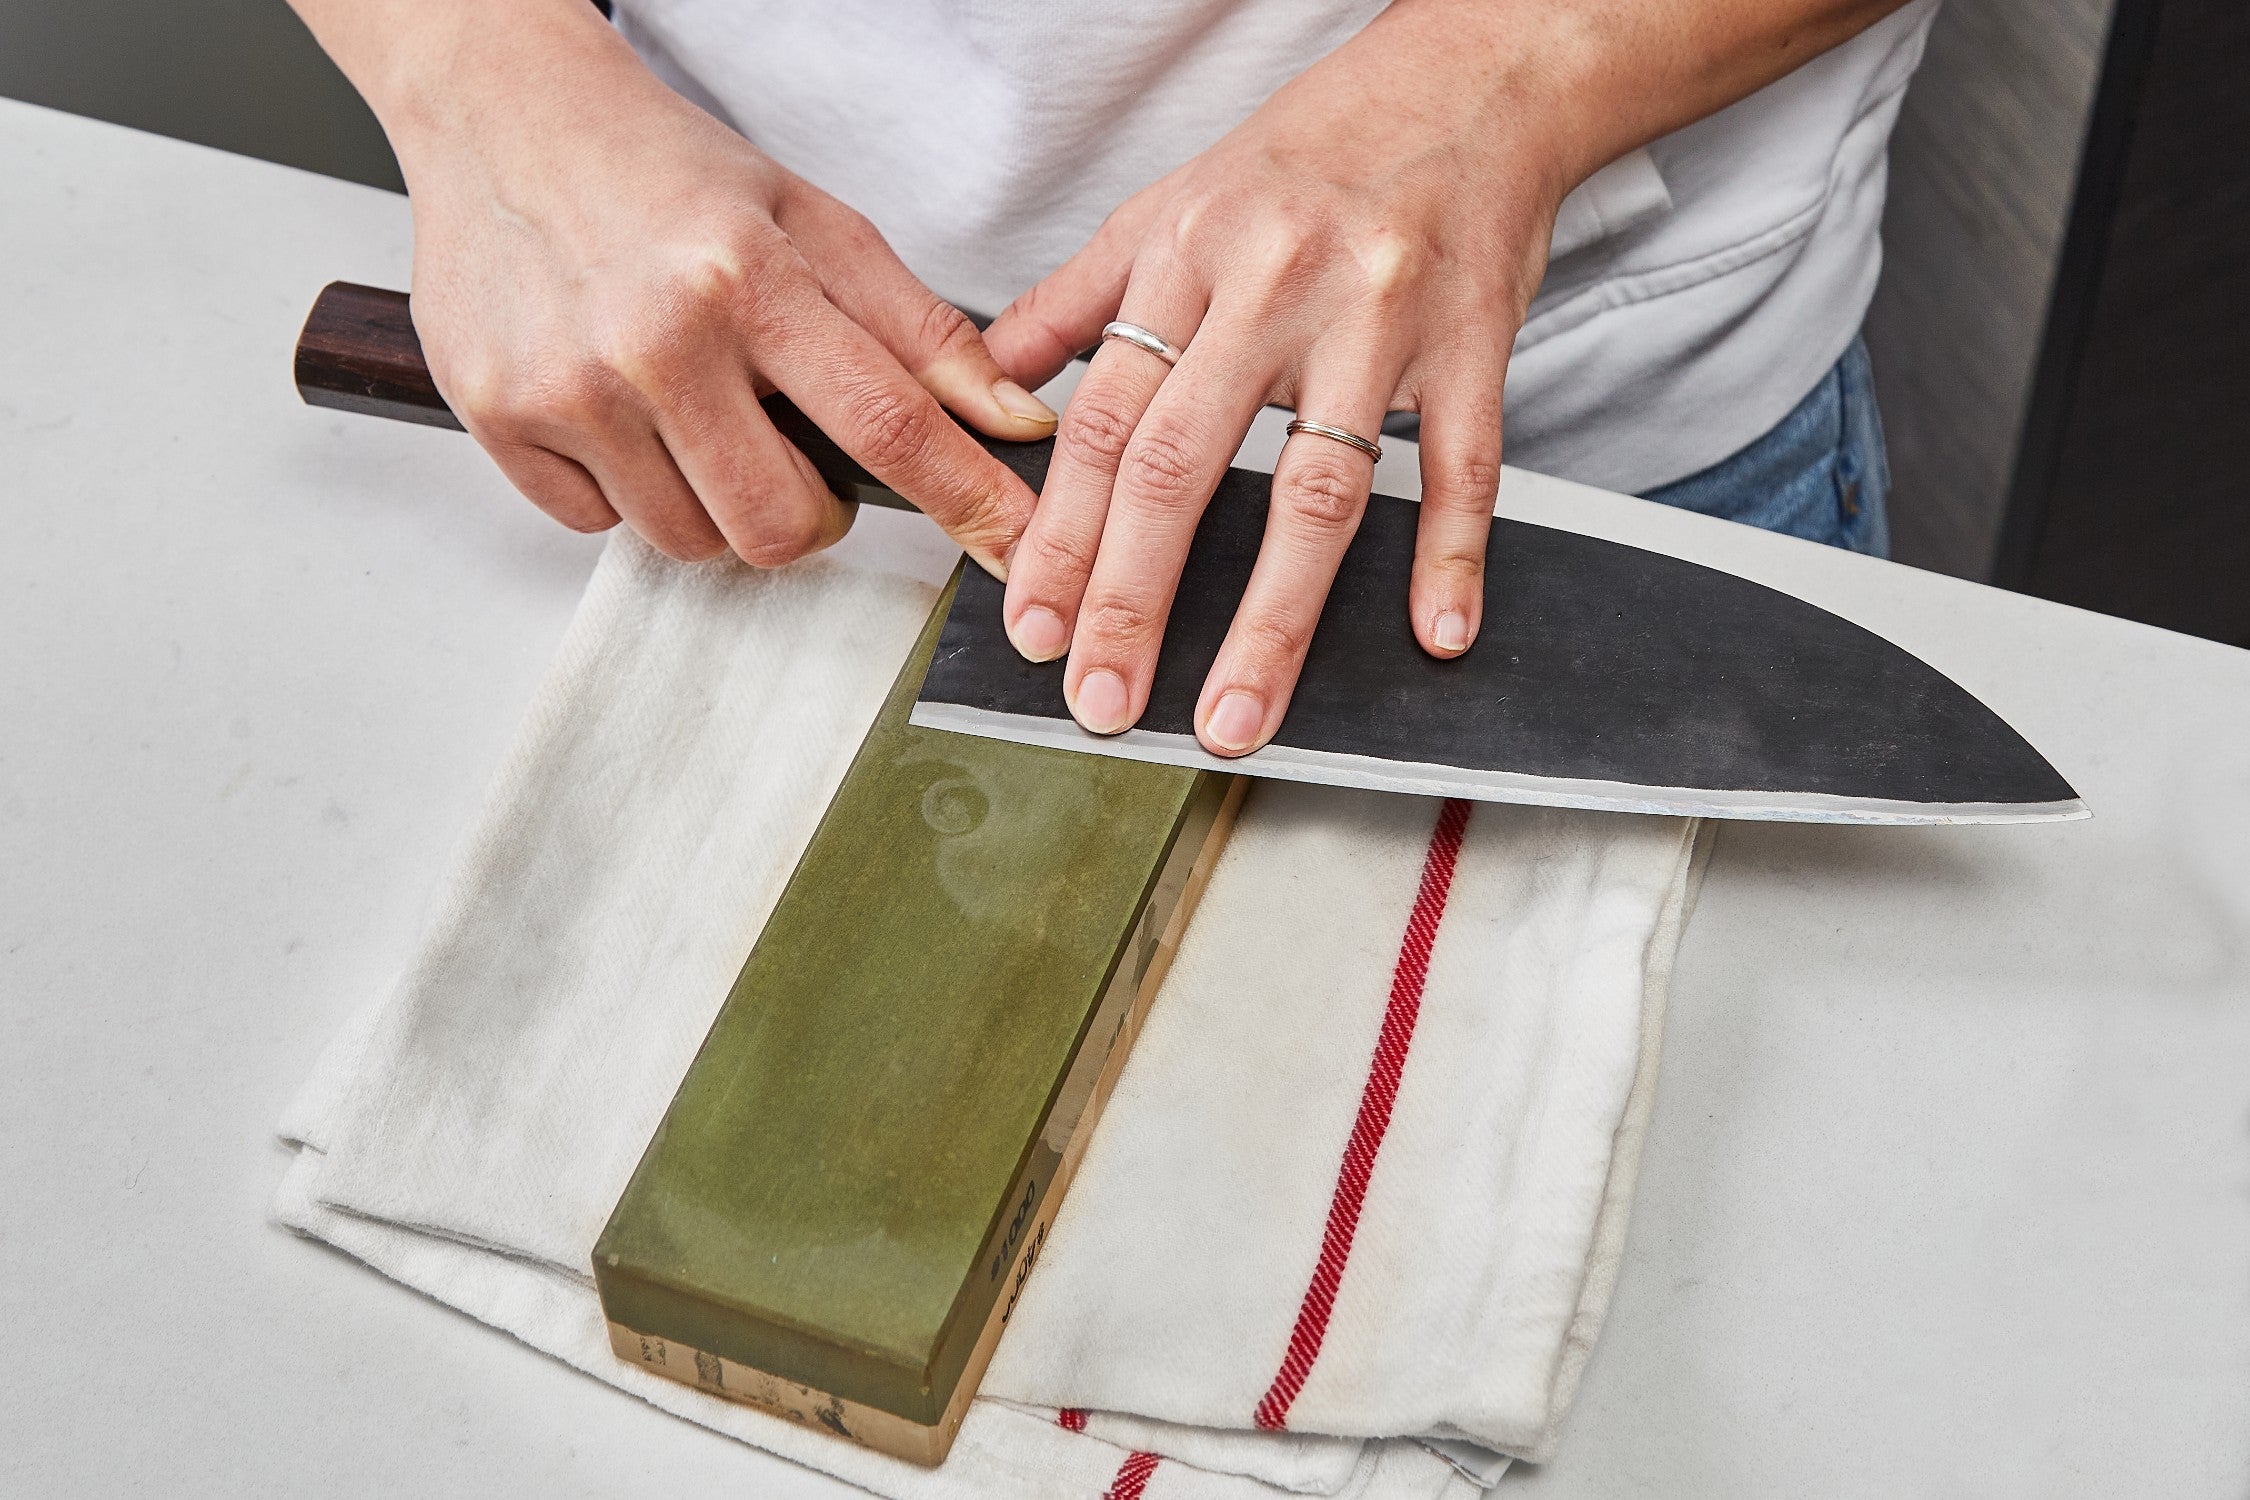 Hone Your Knife (And Sharpening Skills) With This Simple Method